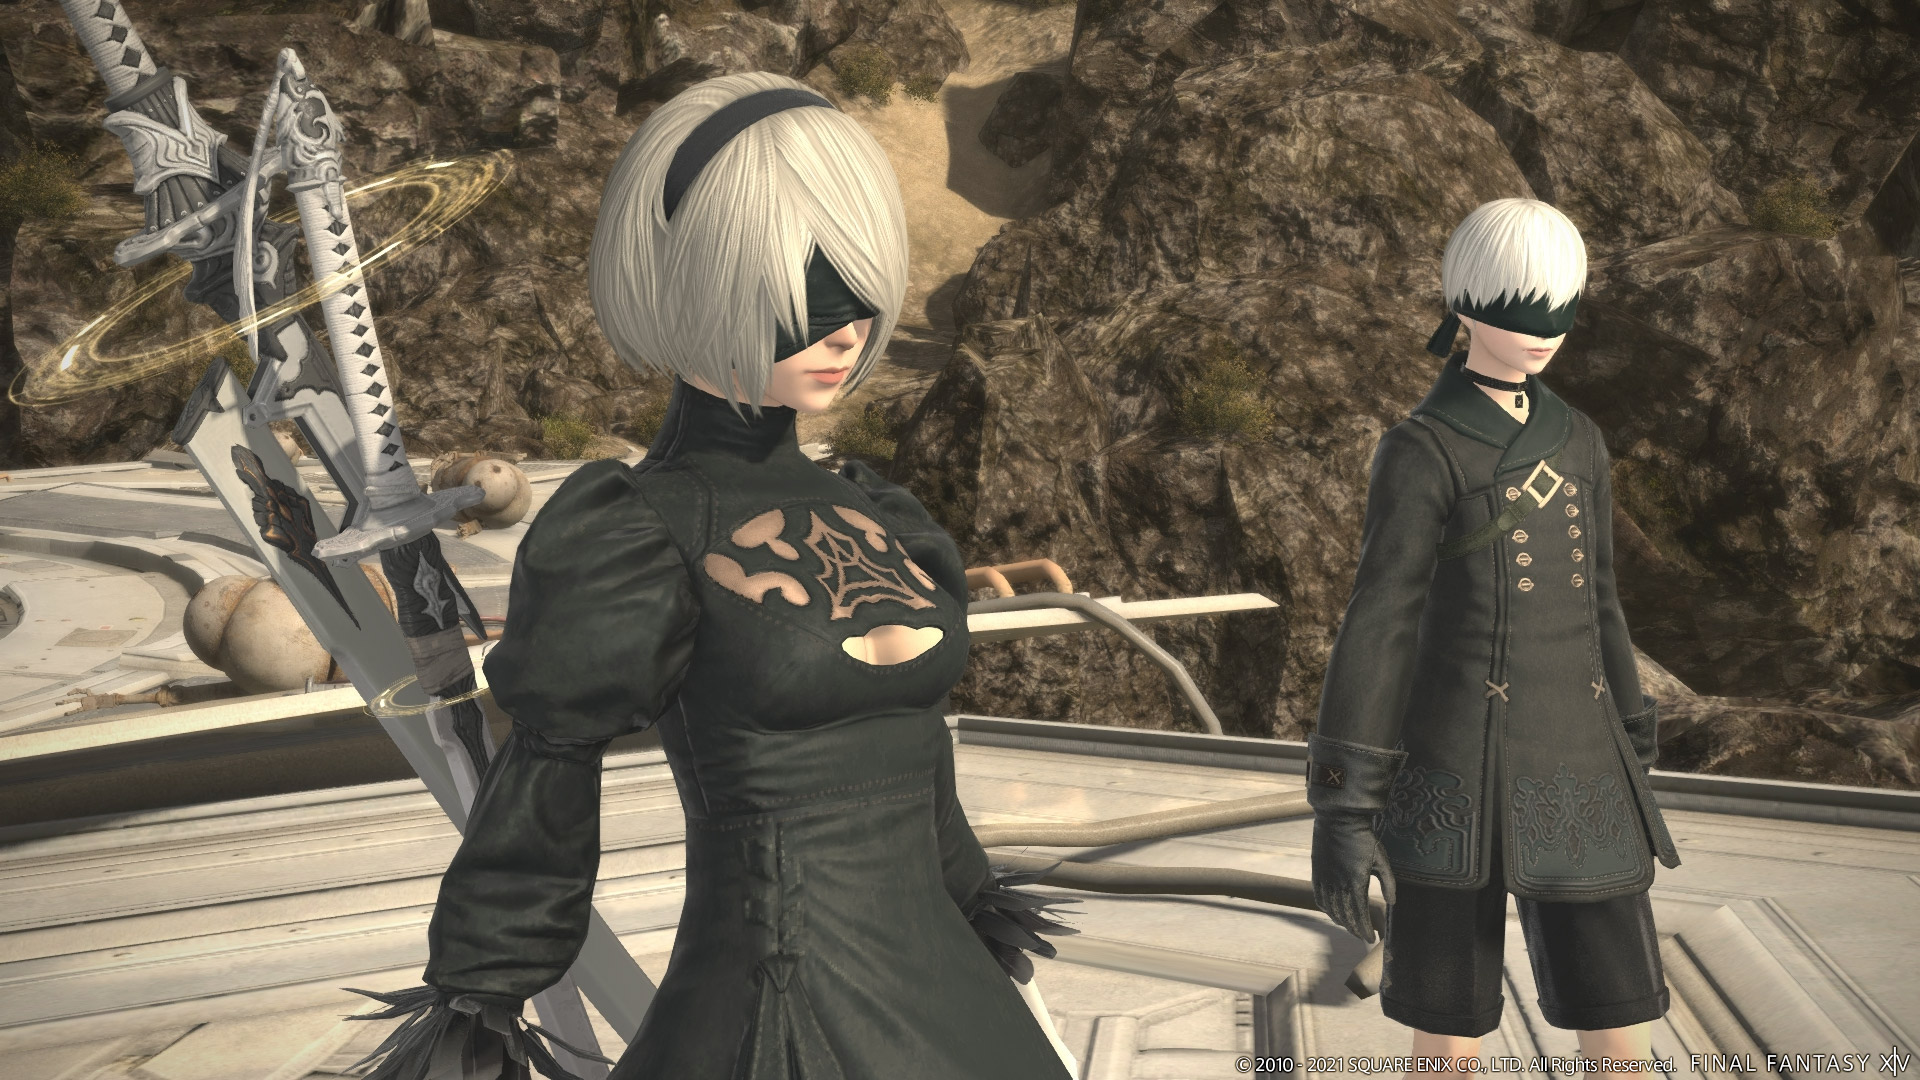 2B and 9S from NieR: Automata make a guest appearance as NPC's in Patch 5.5 of the Shadowbringers expansion for the Final Fantasy XIV video game.